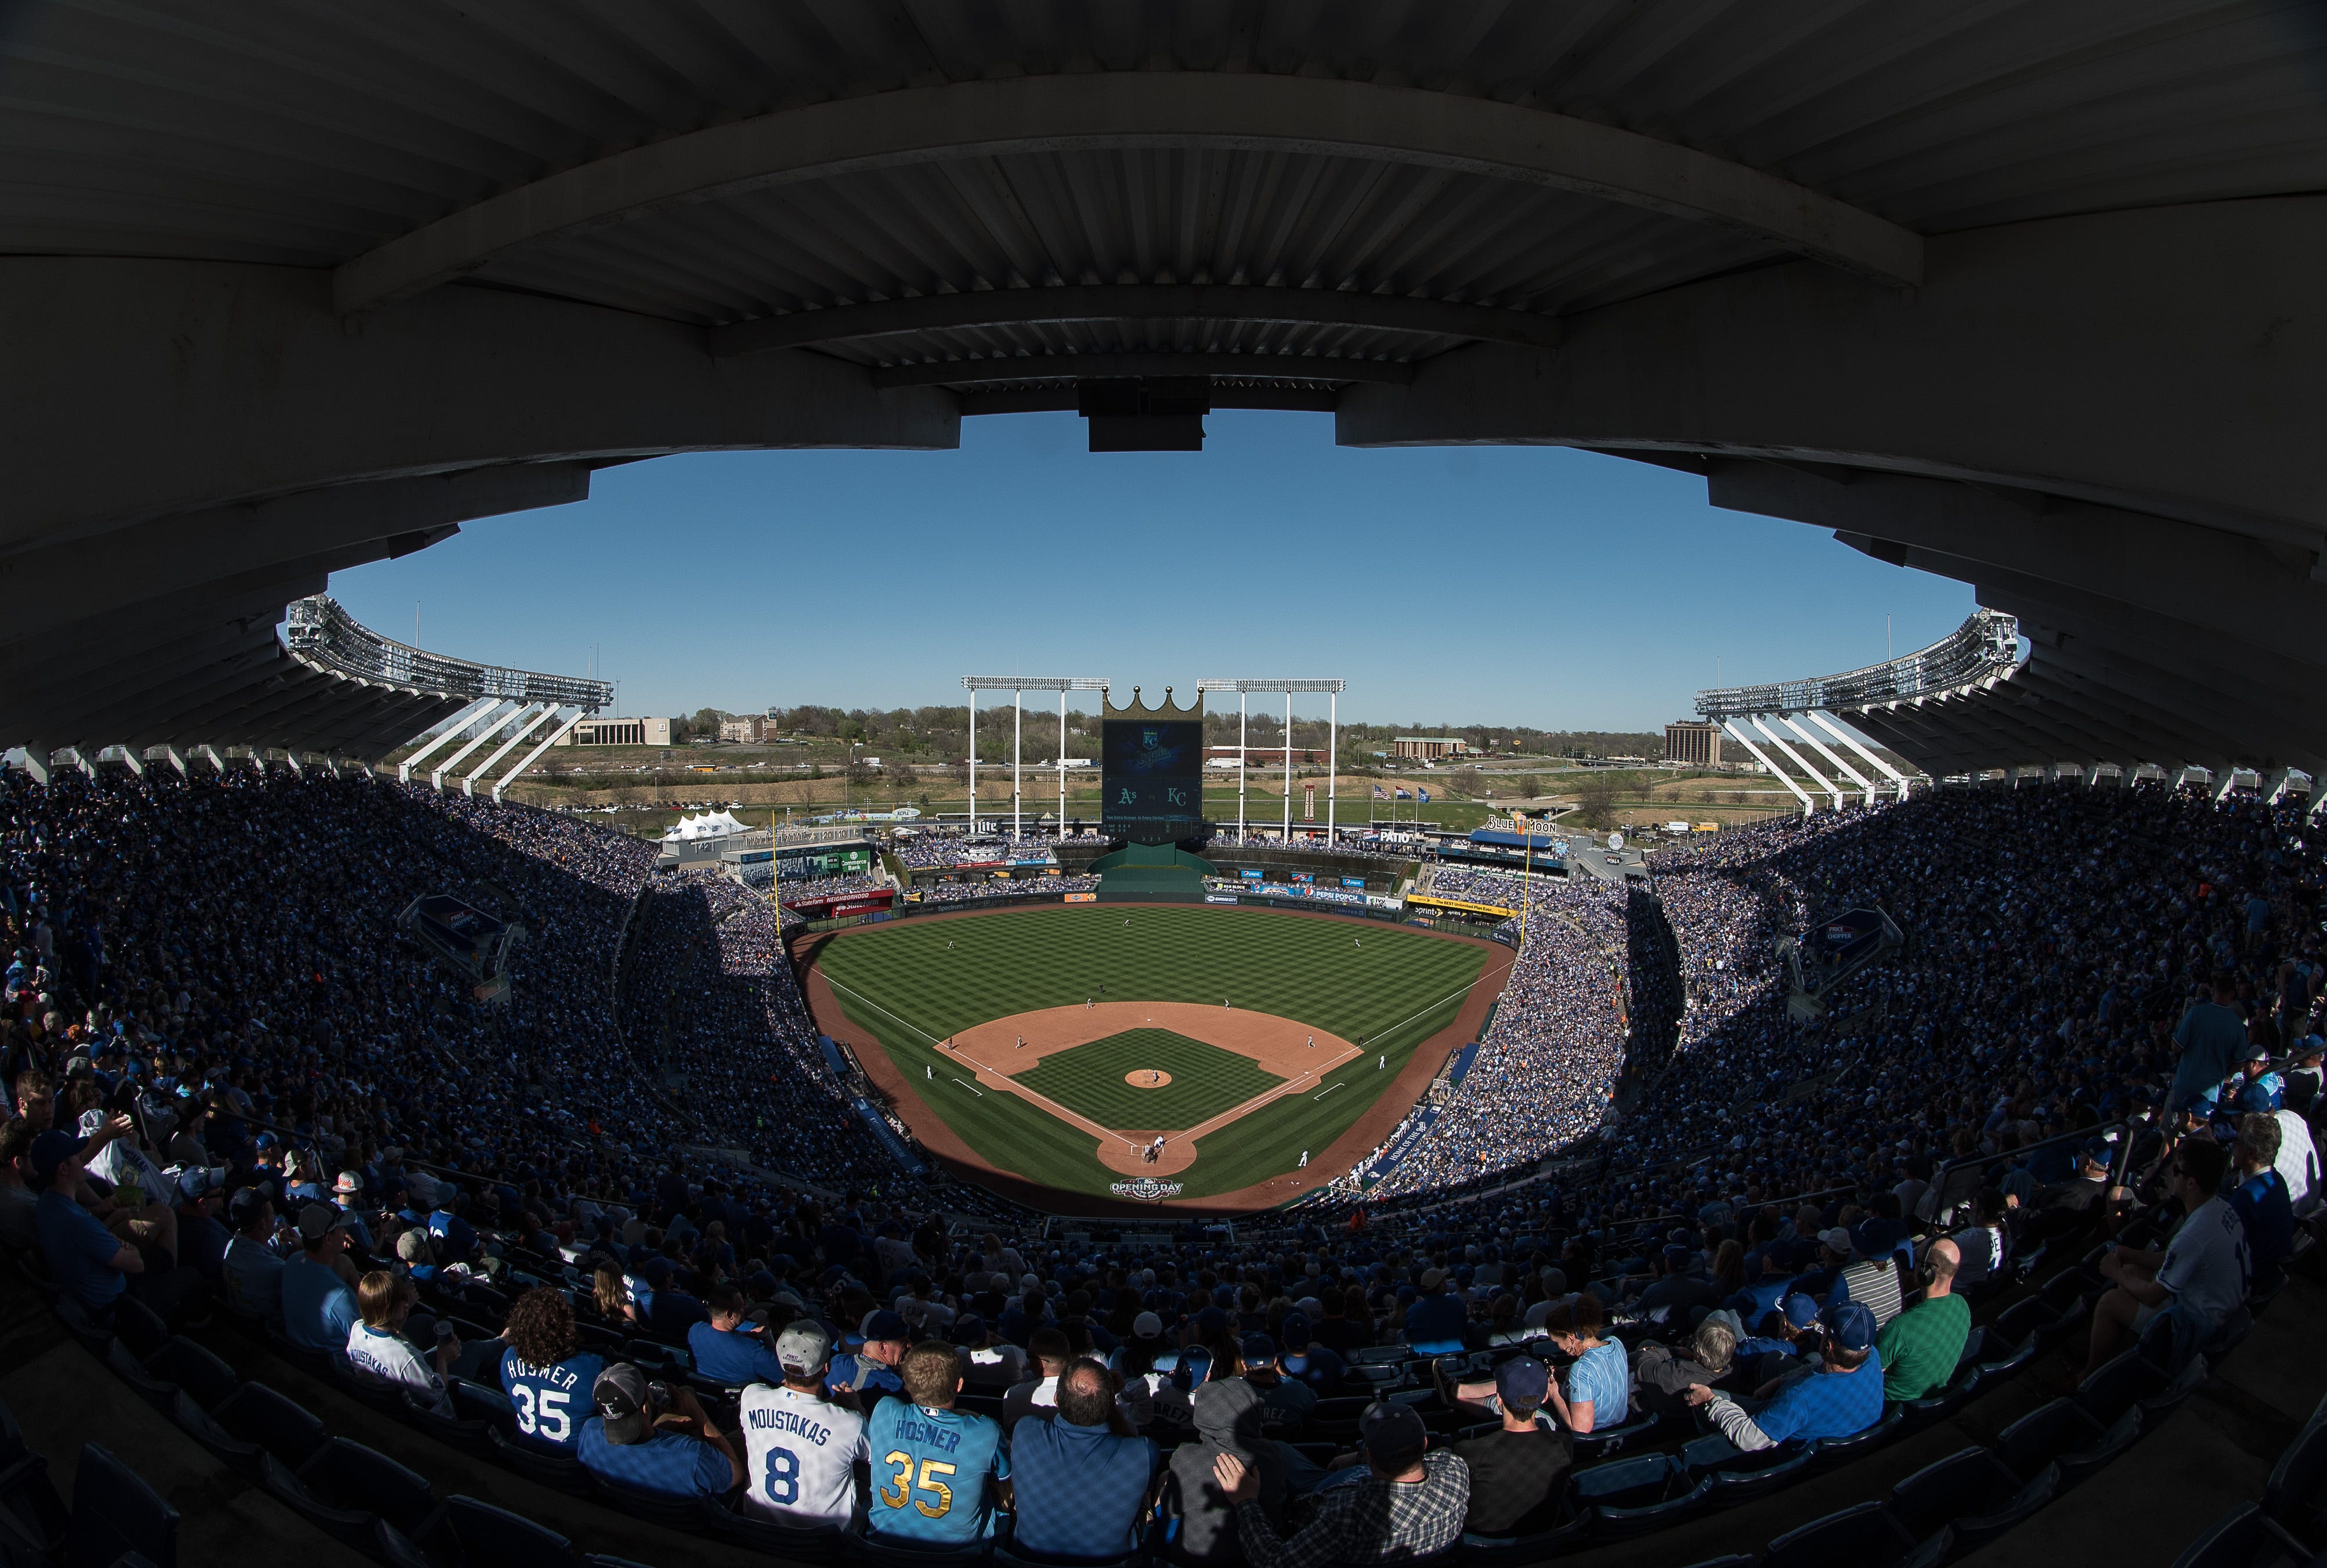 Royals Home Opener in Pictures. Relive Monday’s home opener at Kauffman